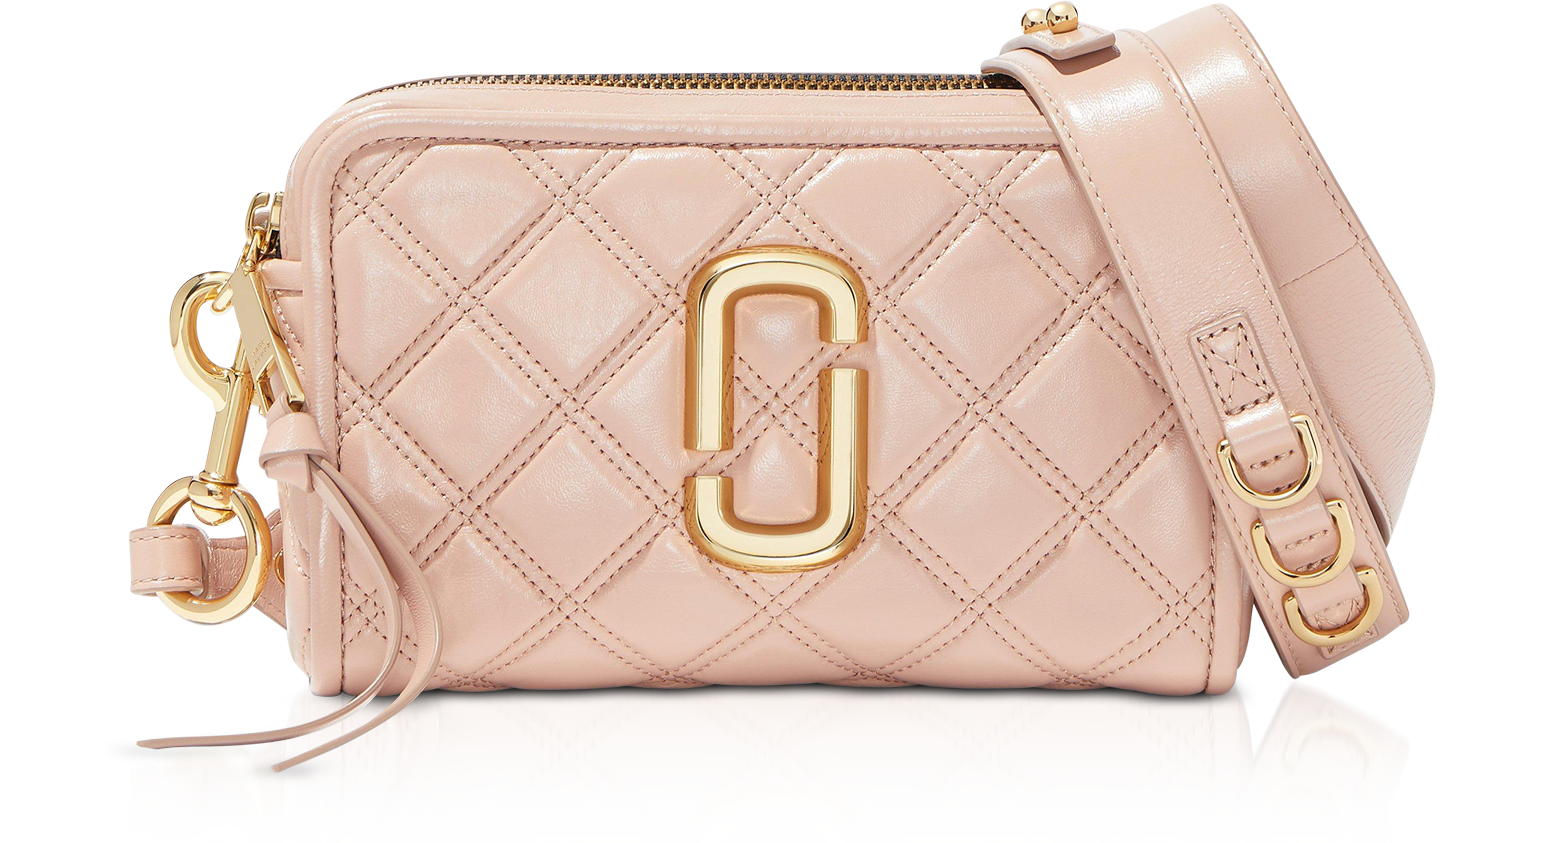 THE Quilted Softshot – my new bag that goes with everything @marcjacobs  #THEMARCJACOBS